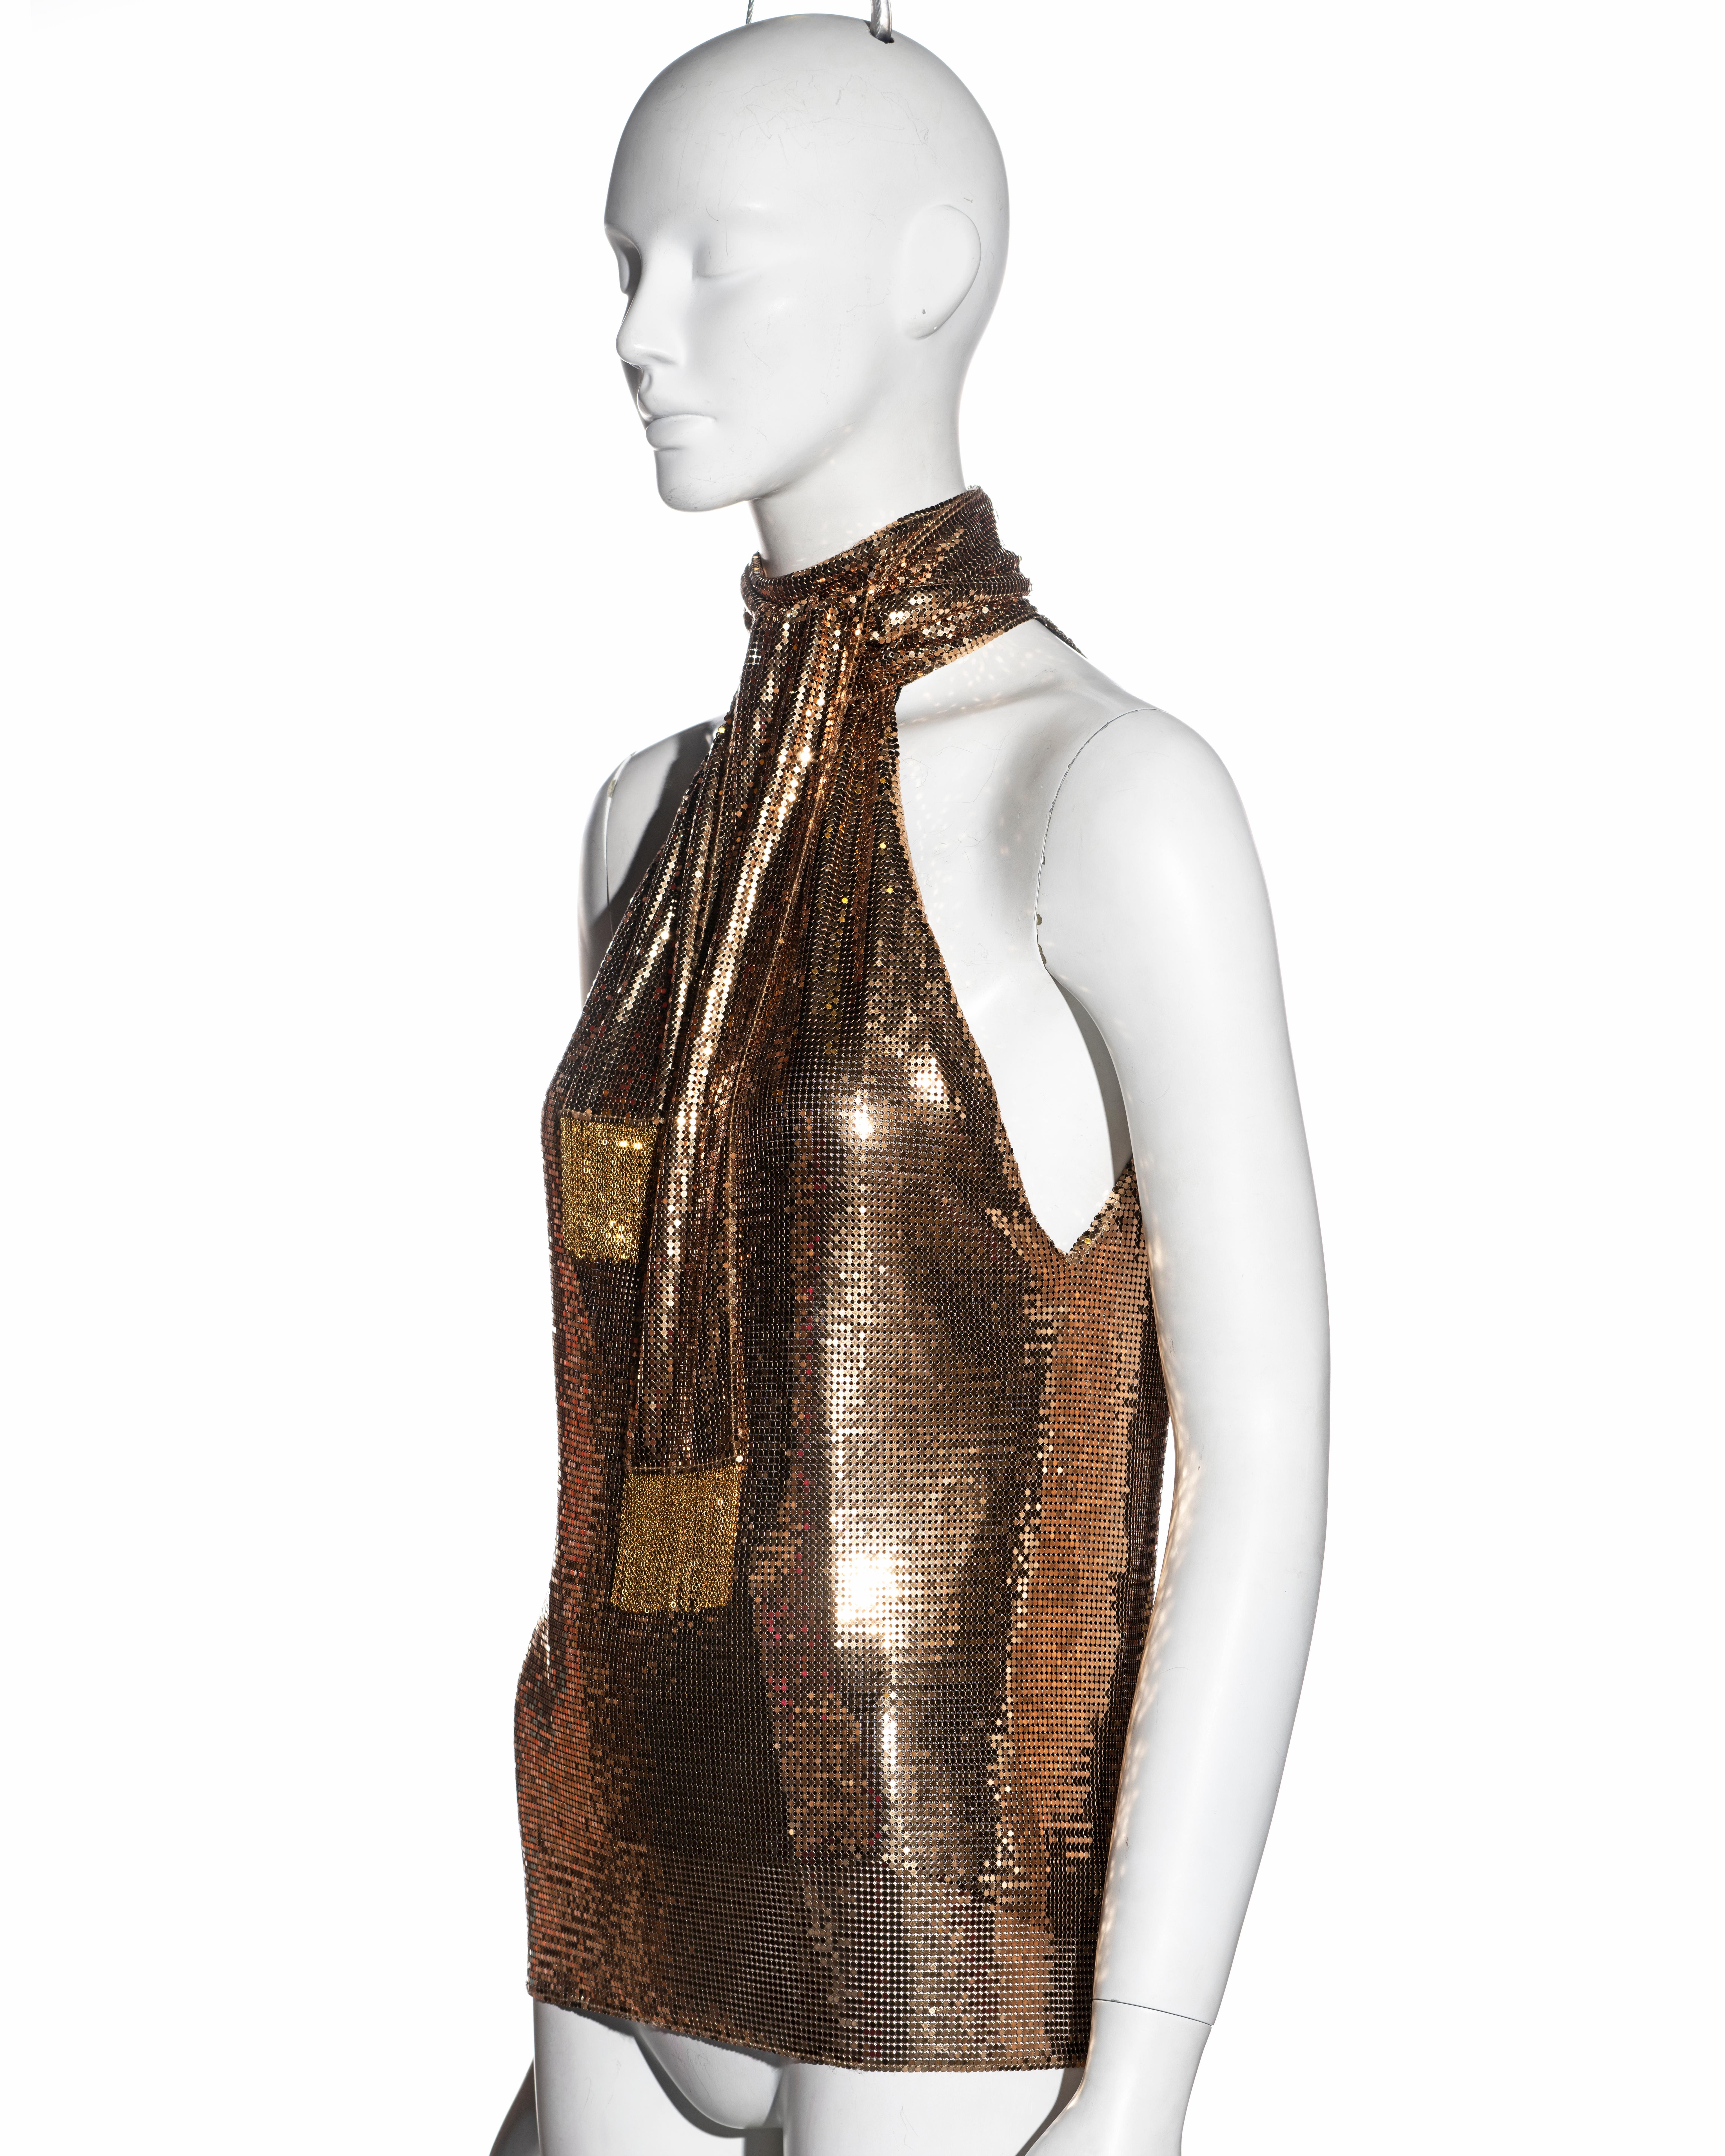 Saint Laurent gold metal mesh evening top, pf 2021 In Excellent Condition For Sale In London, GB